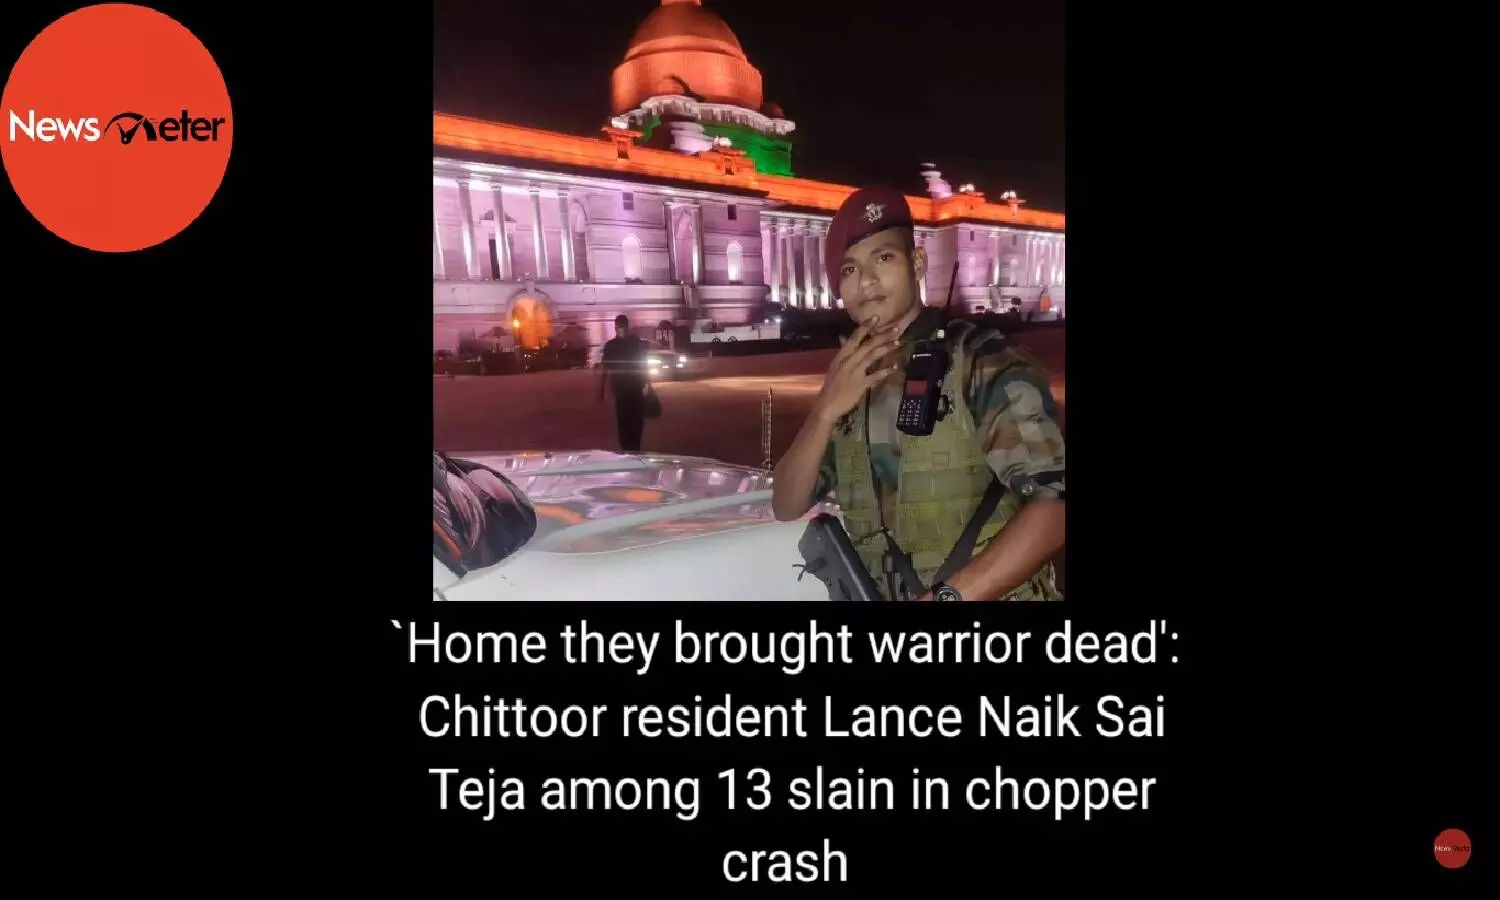 `Home they brought warrior dead: Chittoor resident Lance Naik Sai Teja among 13 slain in crash